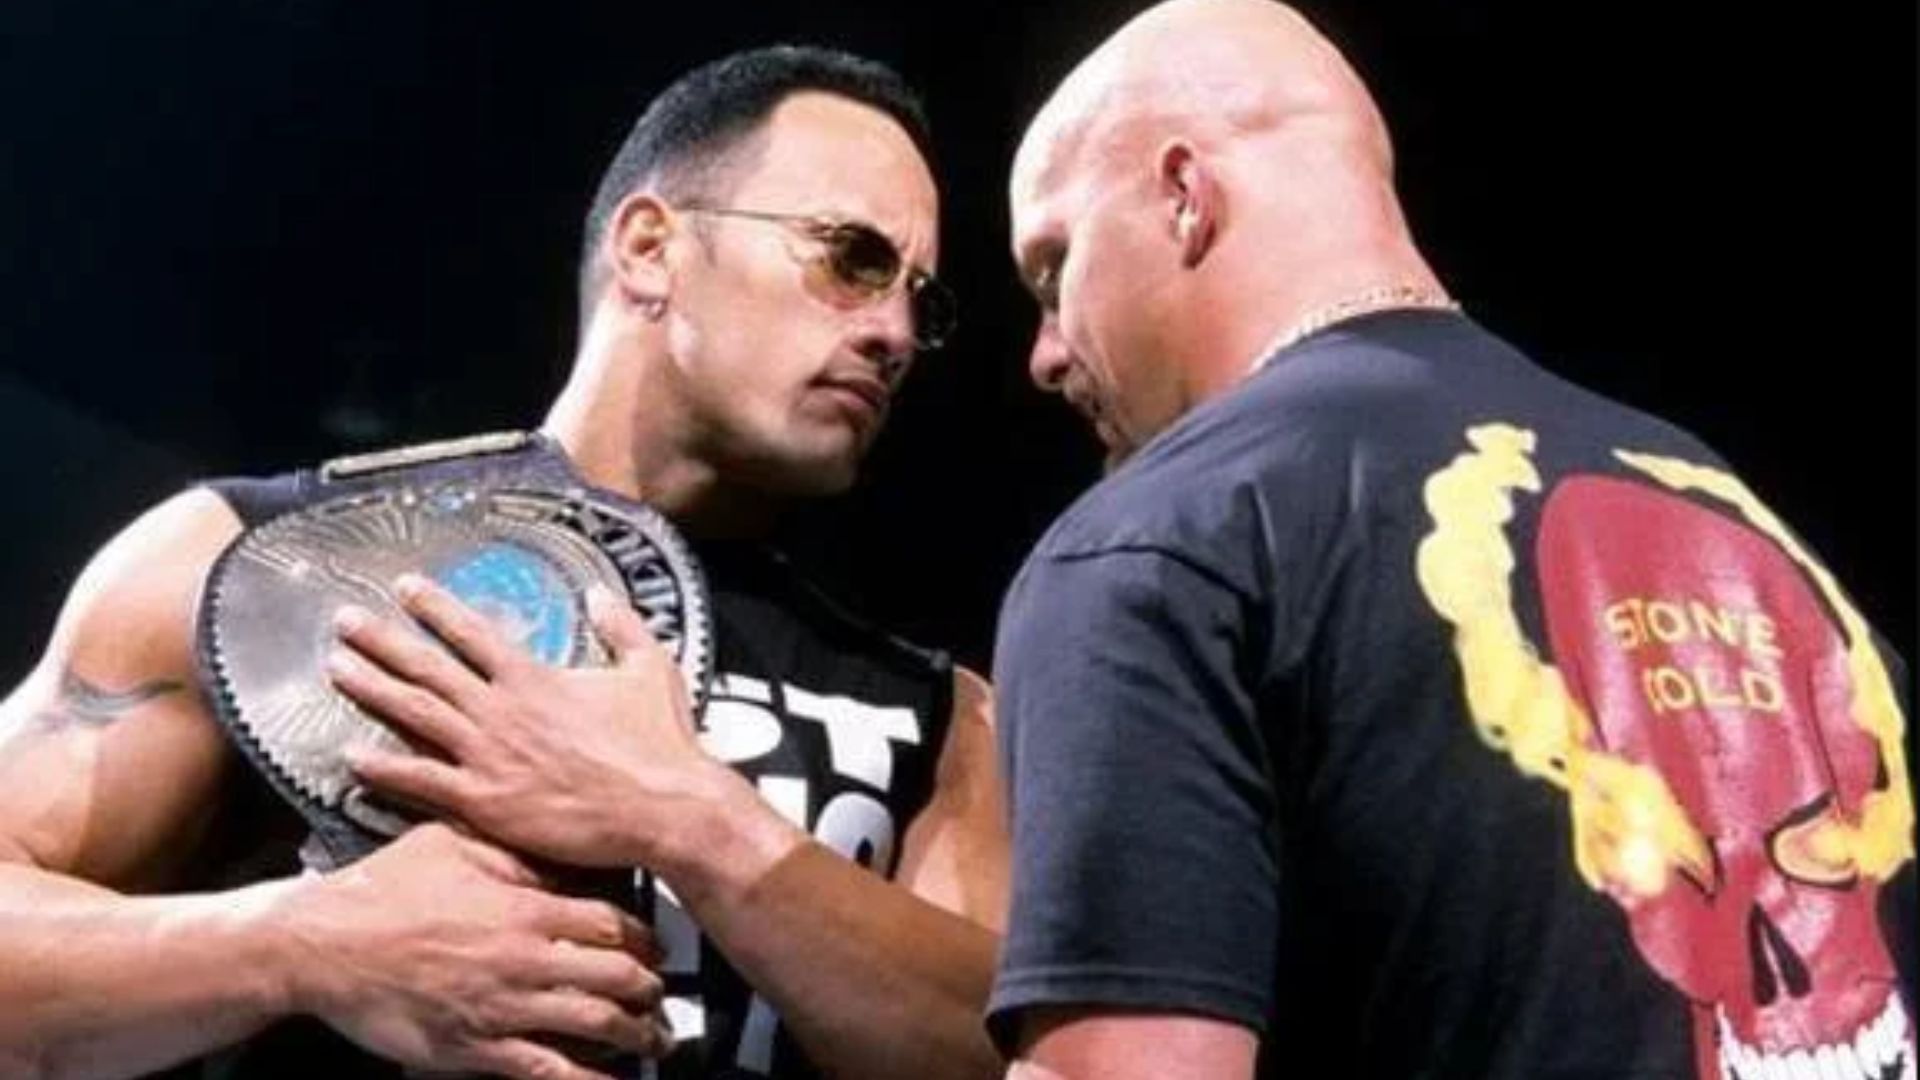 The Rock (left) and Steve Austin (right)